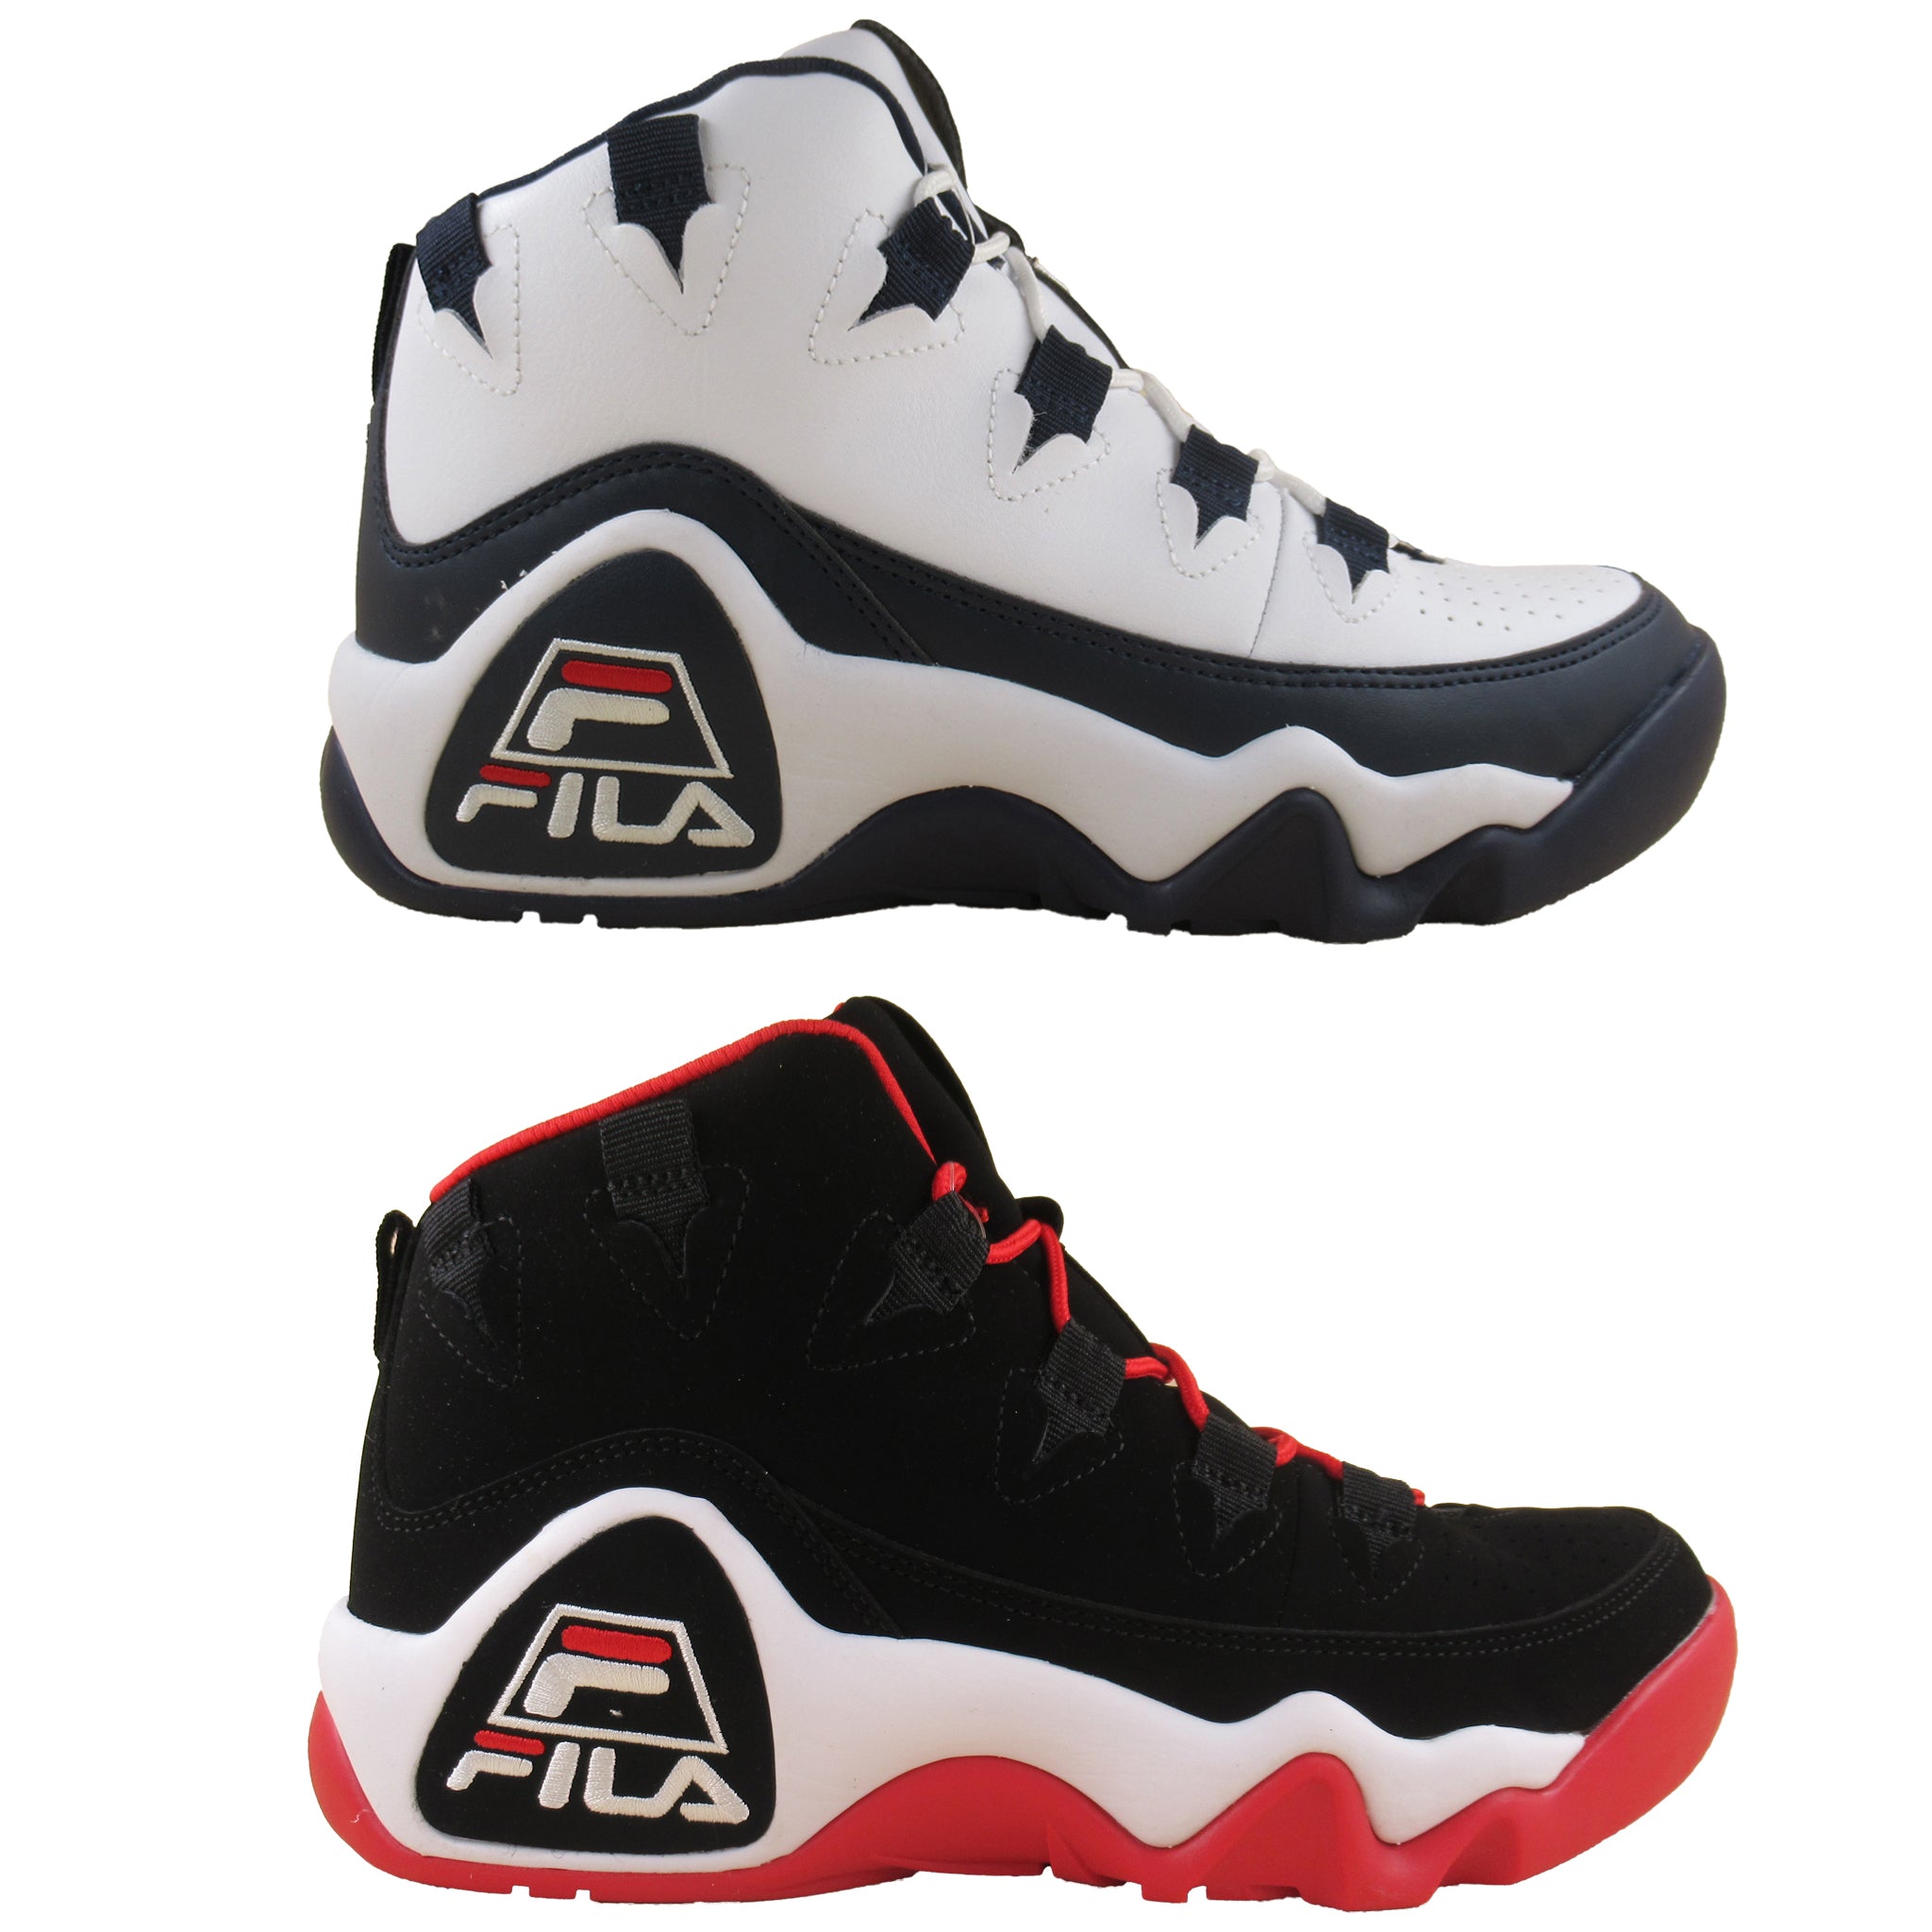 grant hill tennis shoes